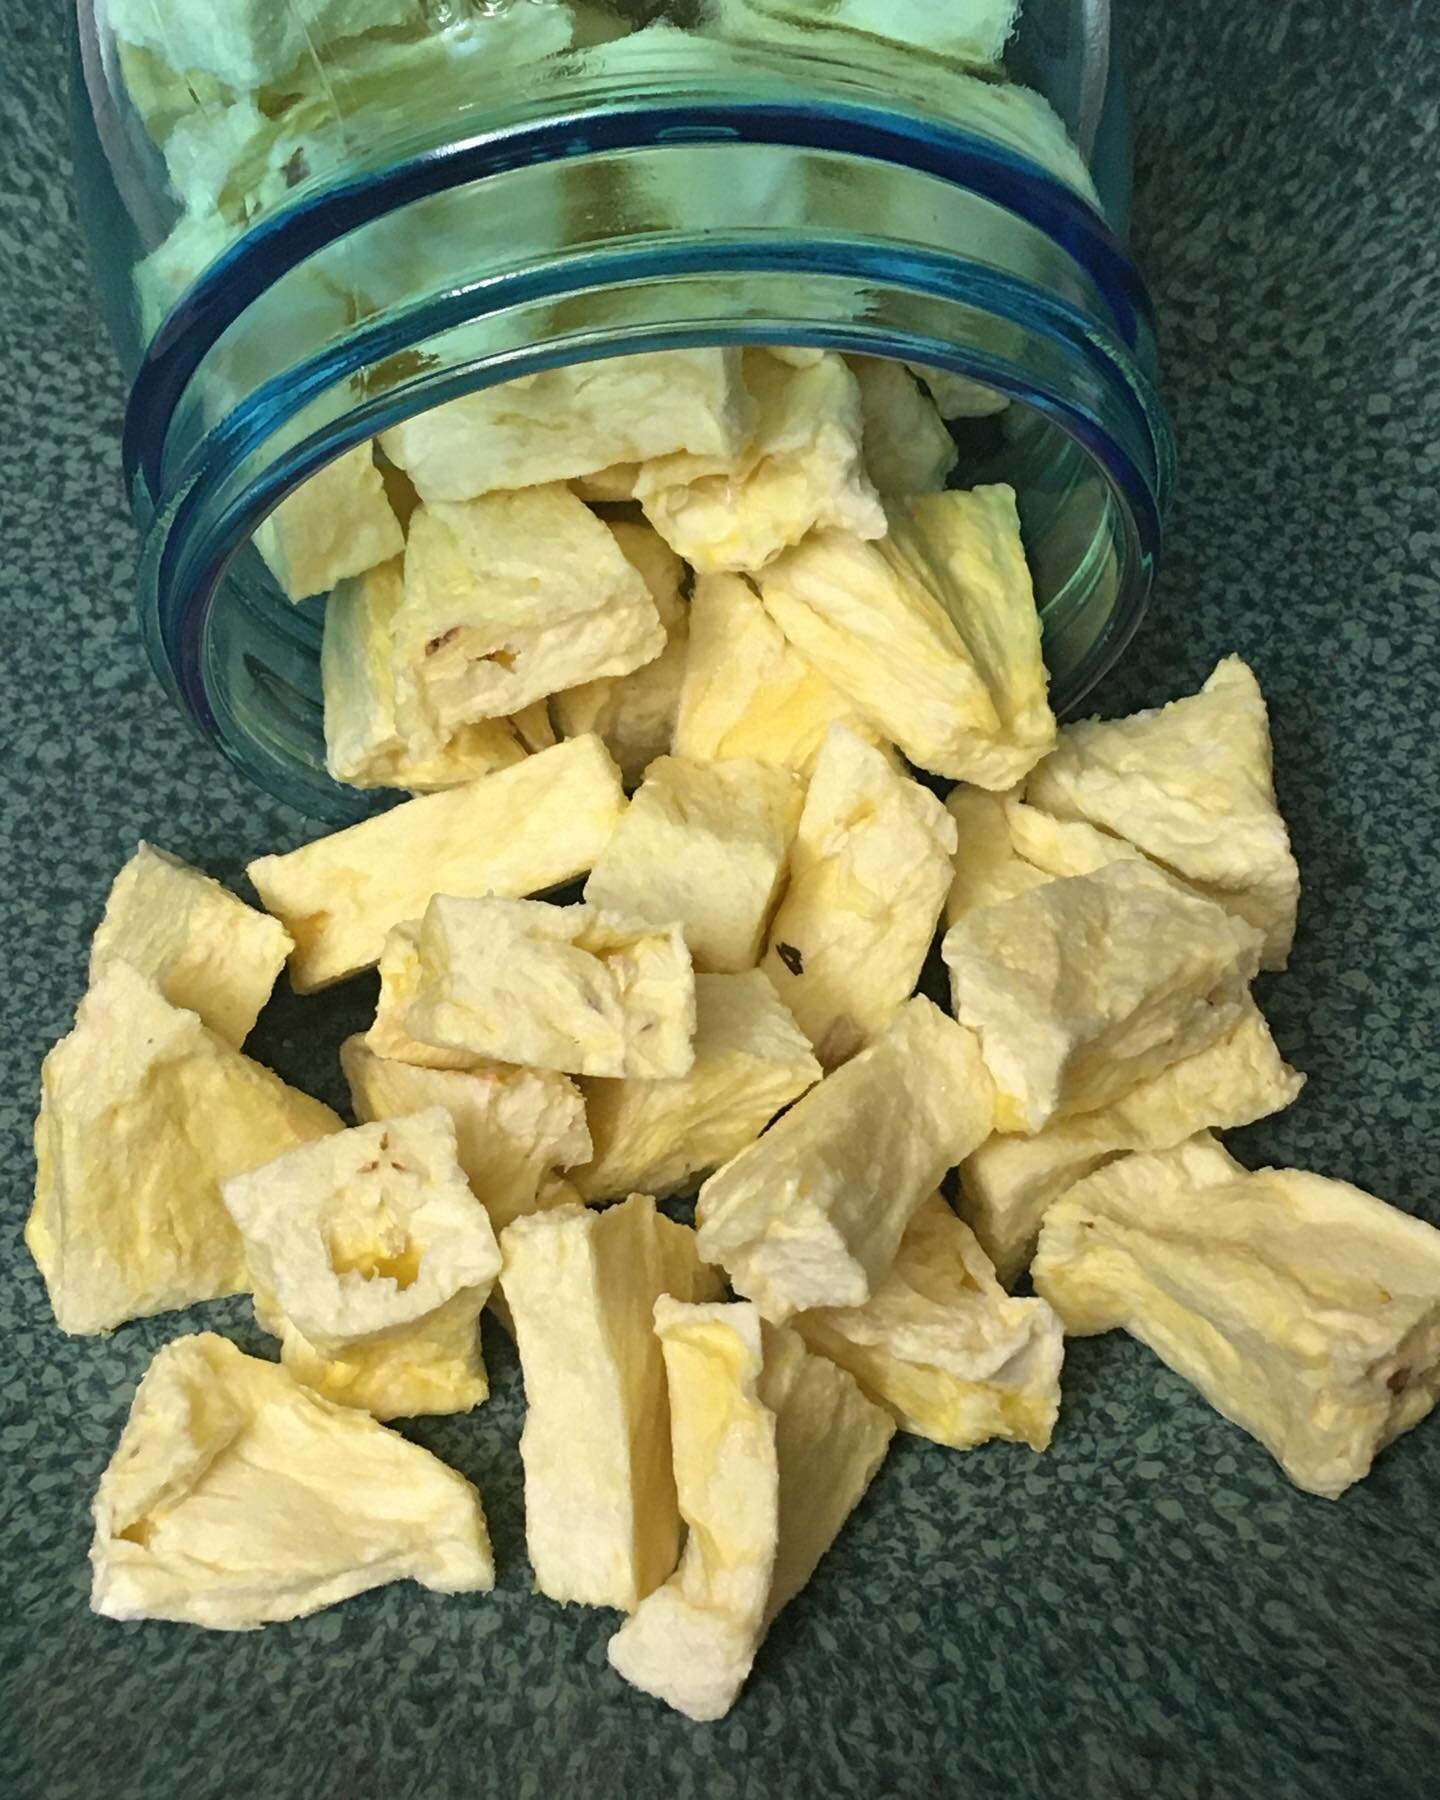 Freeze dried pineapple fresh out the den! If stored properly these foods can last up to 25 years- though I doubt these will last even one day! 
Freeze drying is the best way to preserve food with the greatest amount of nutrients intact. 

#freezedry 